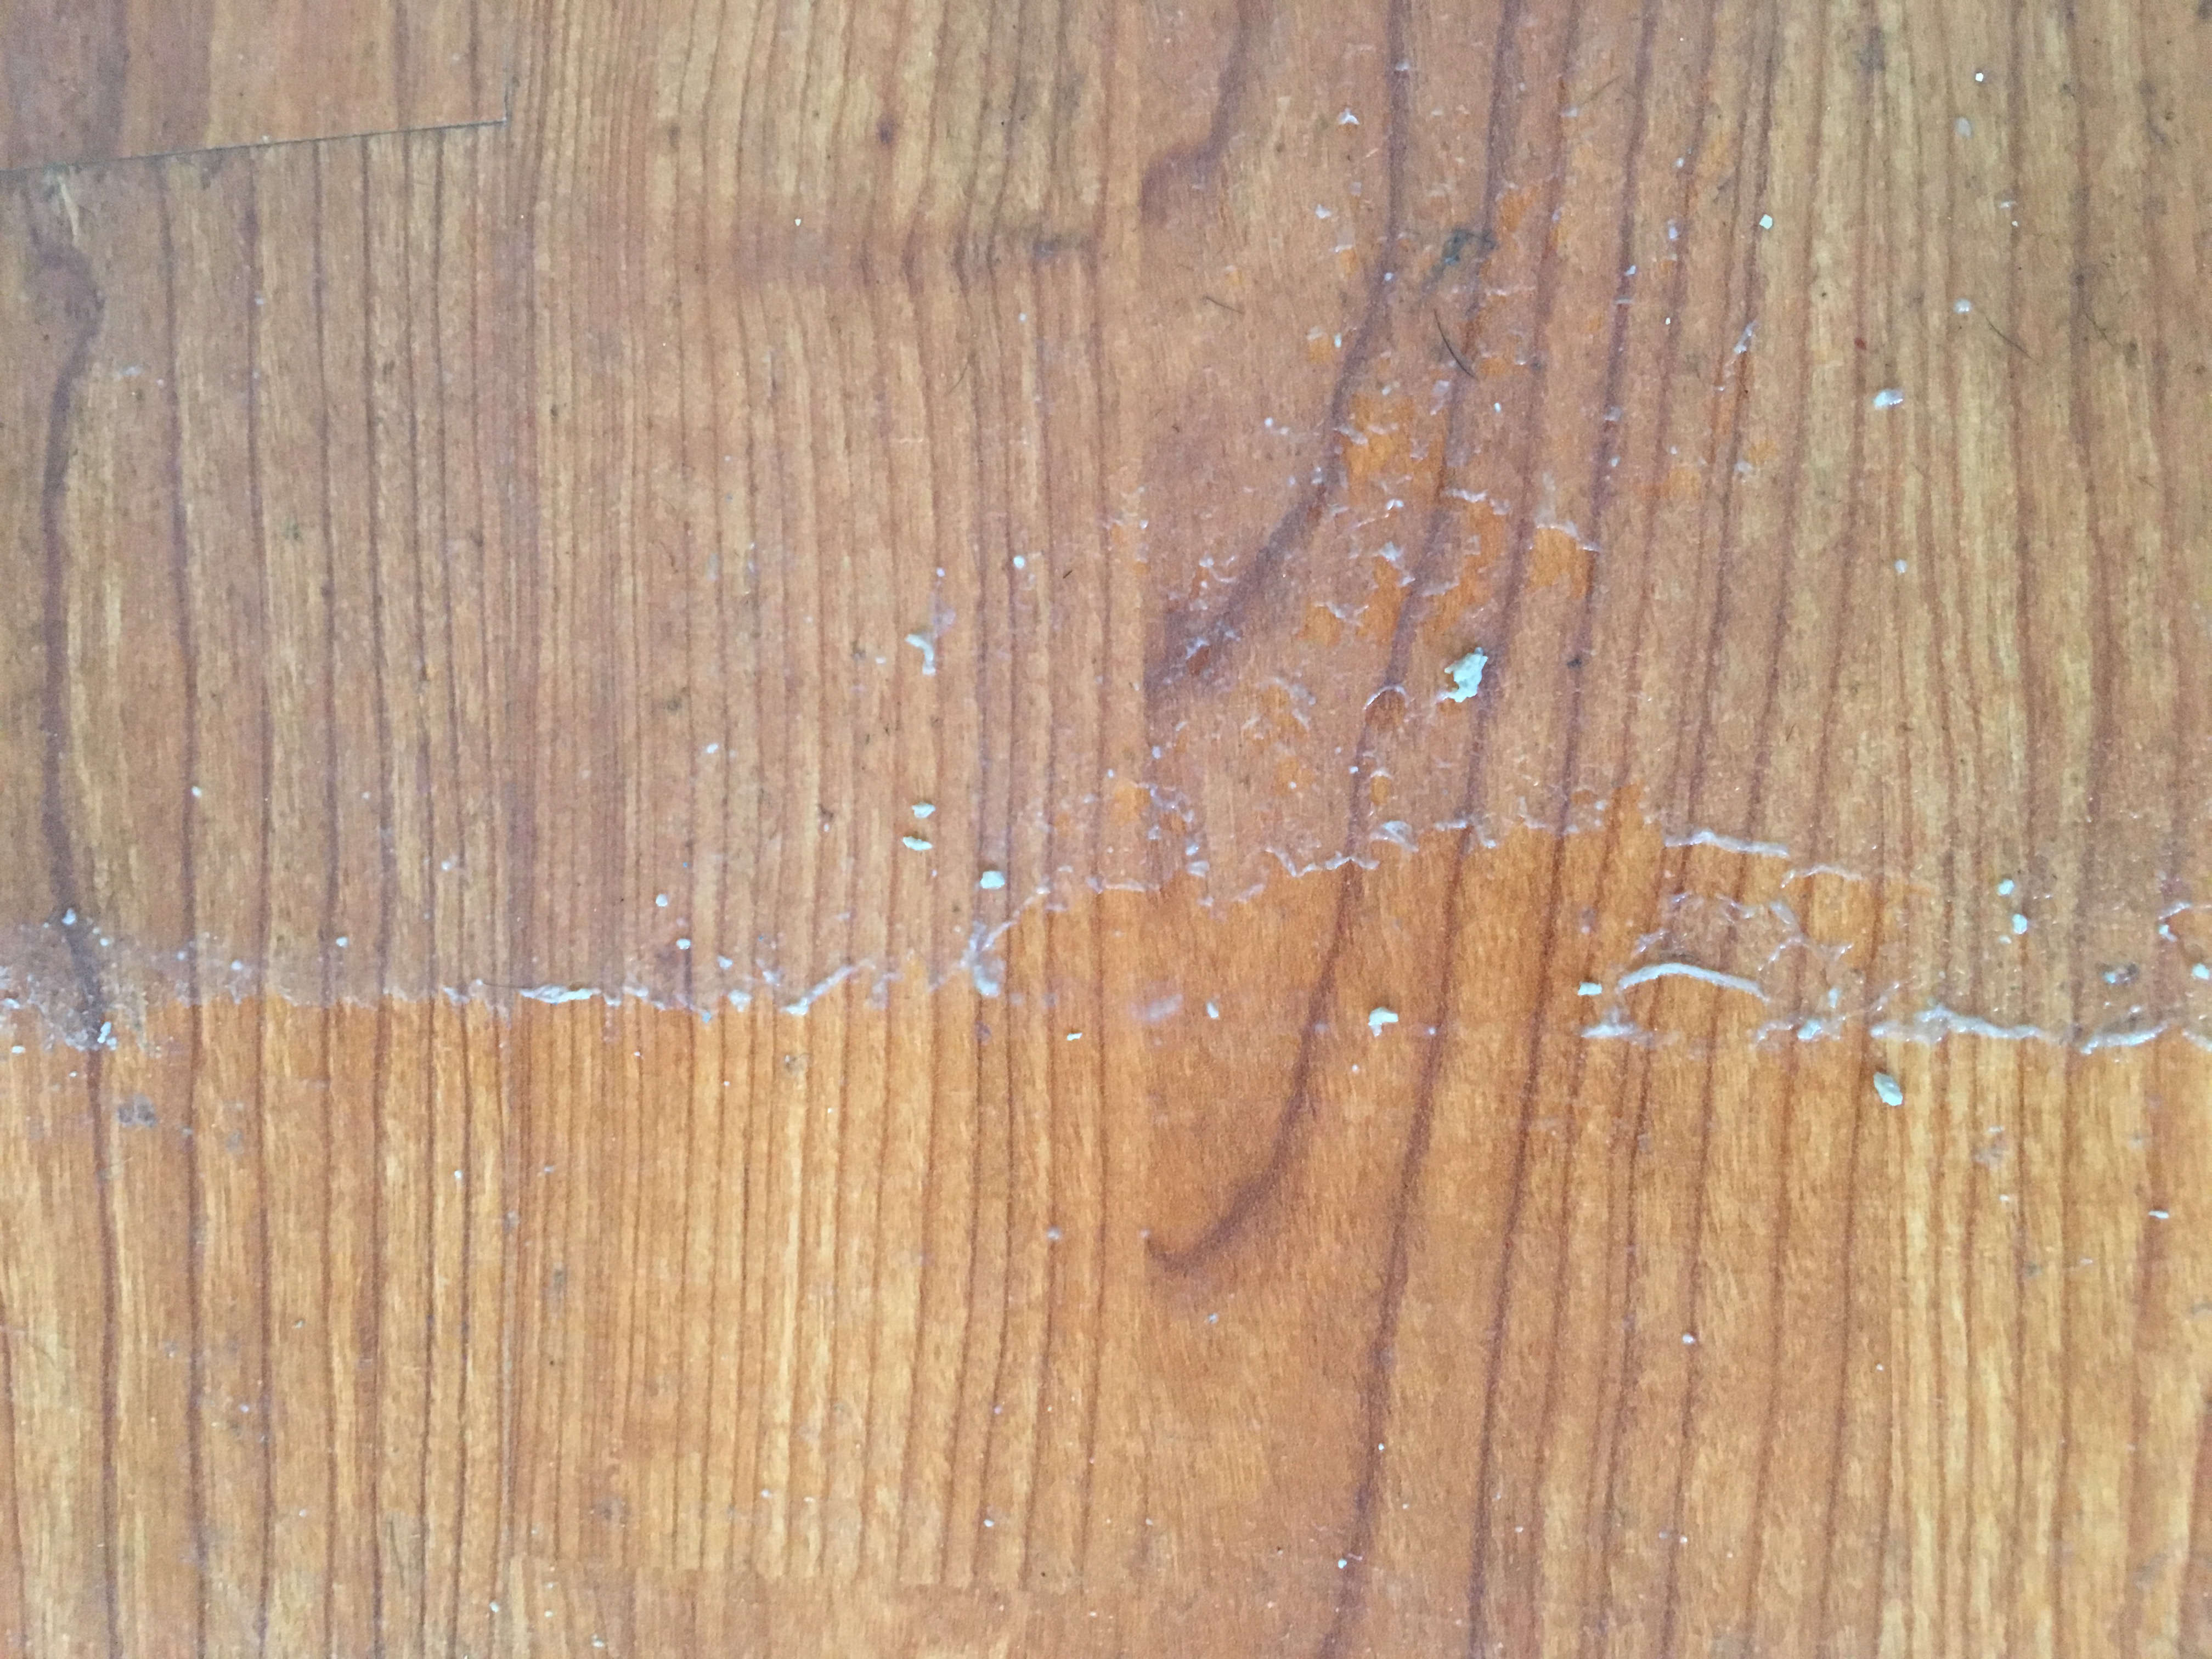 Referral Removes Build Up from Fort Wayne's Wood Floors